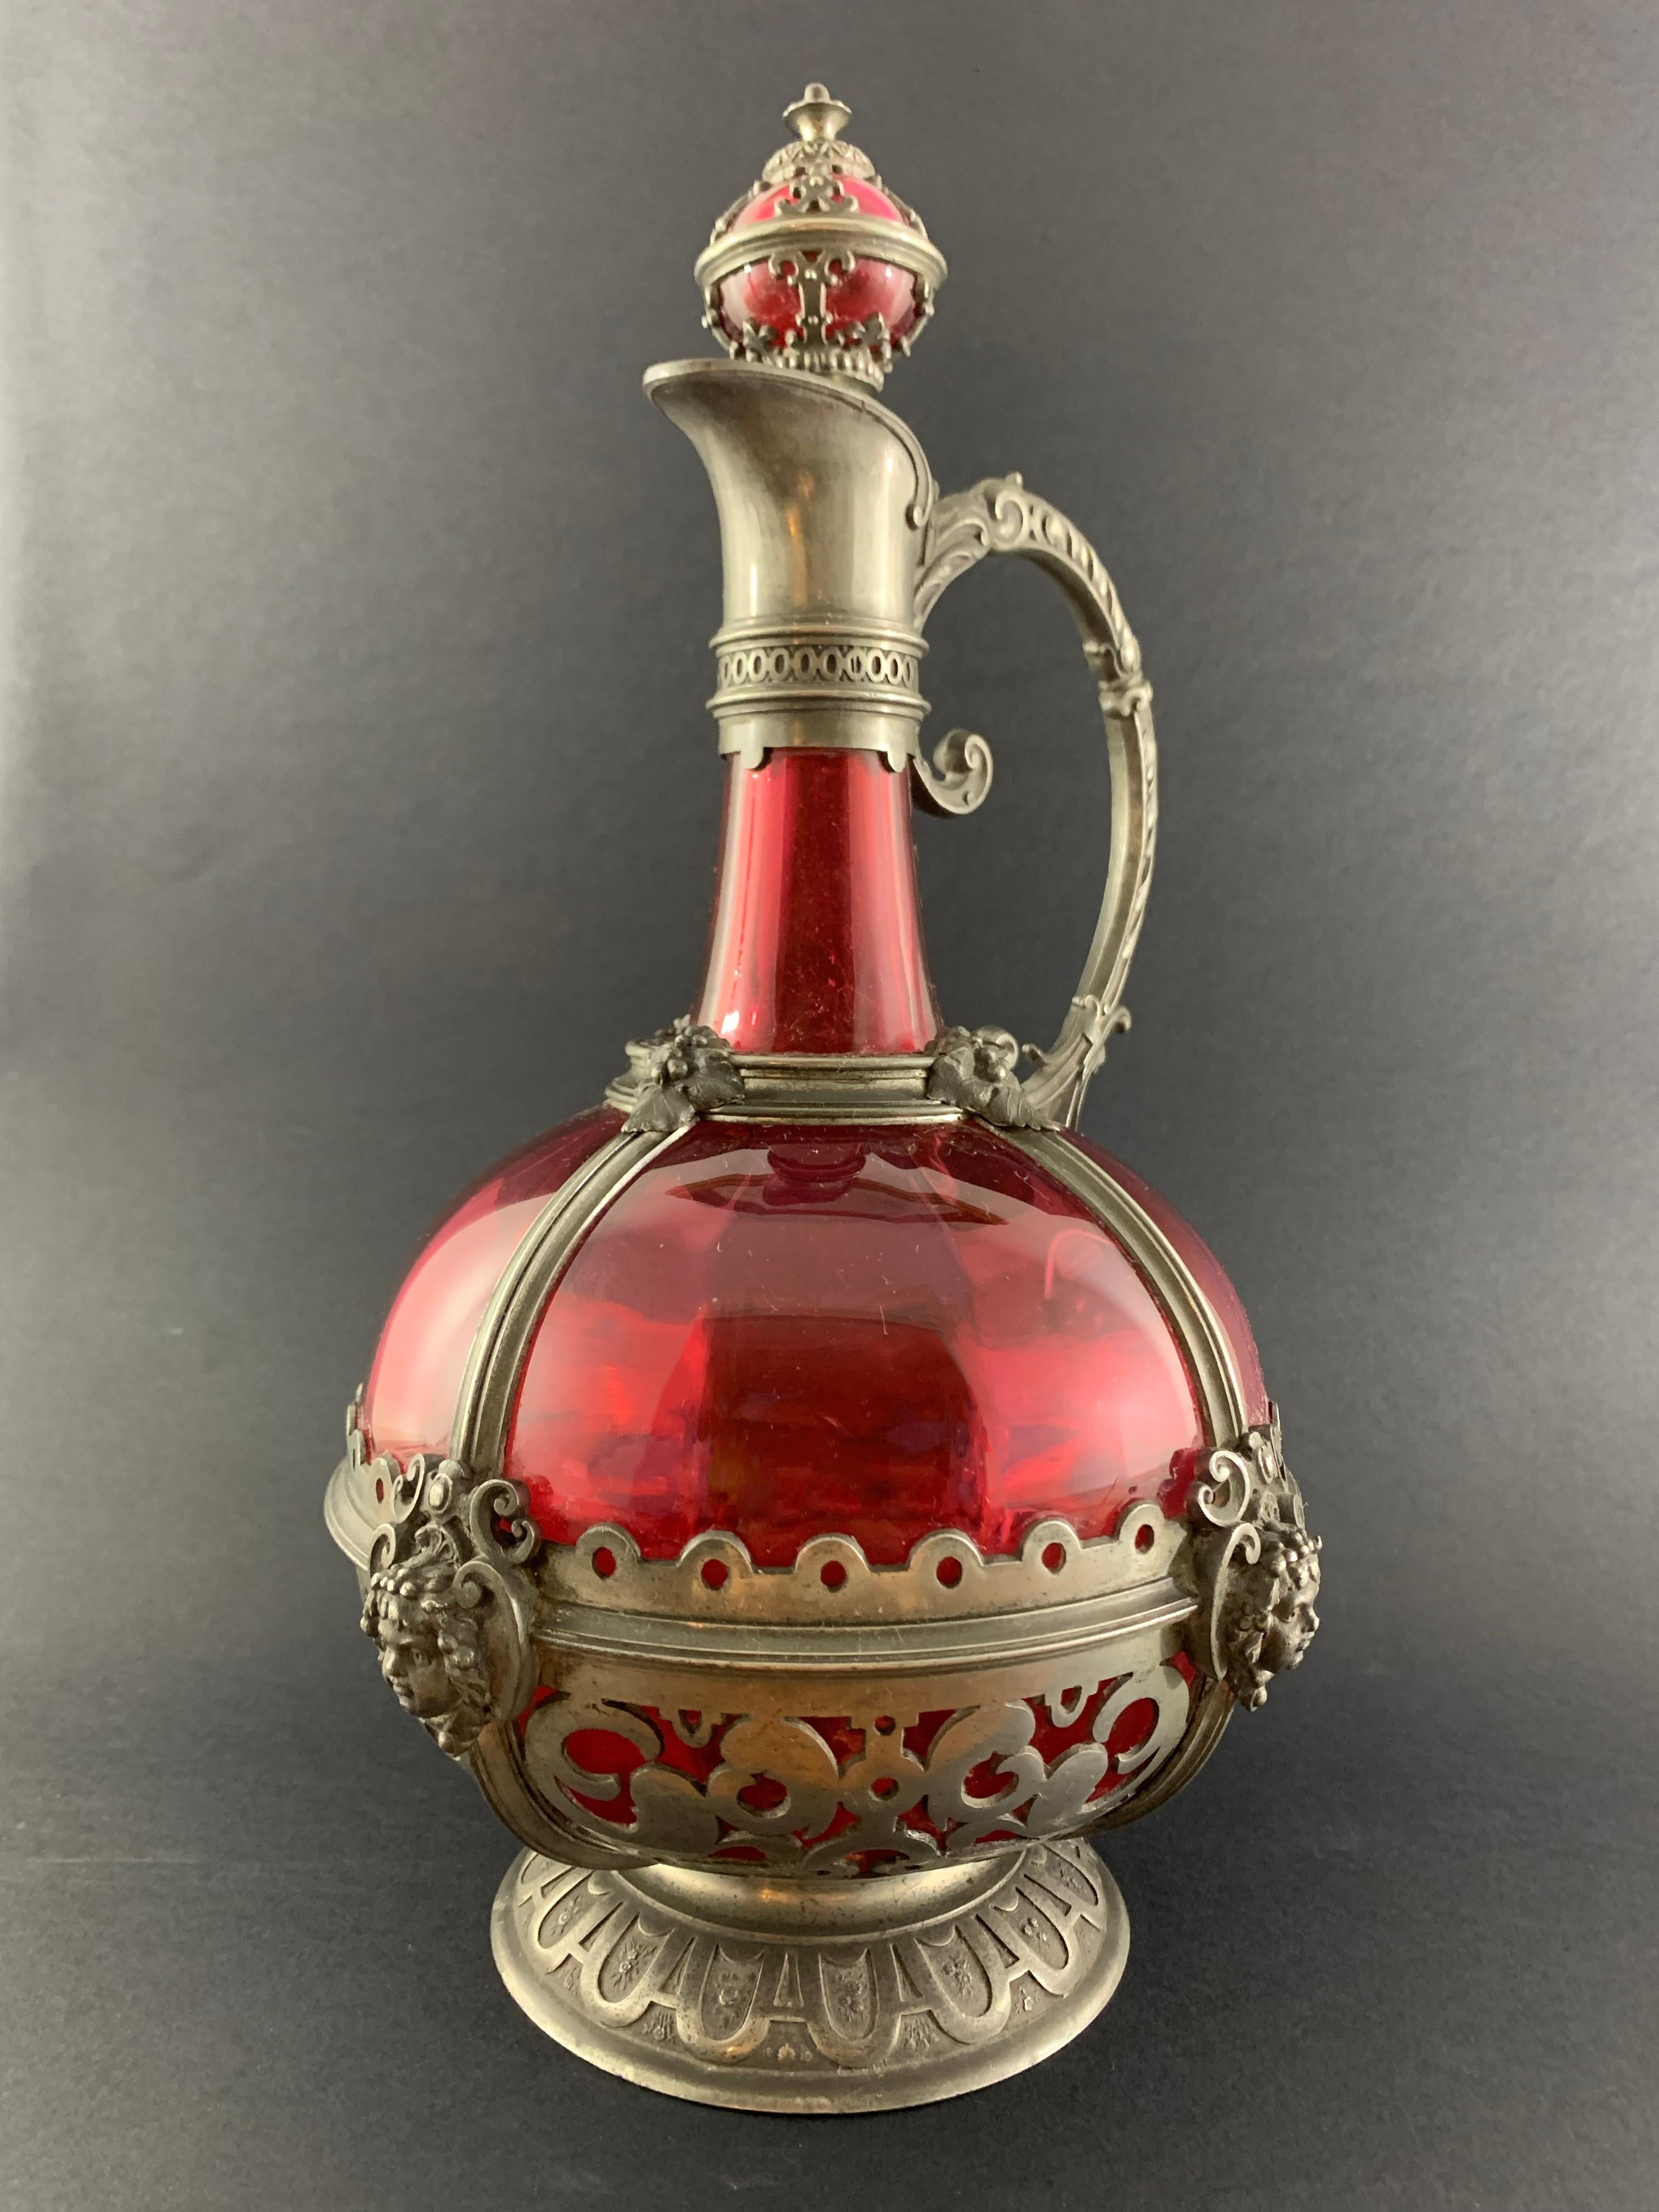 Beautiful red crystal ewer with pewter frame. We find on it motifs of vine and grape recalling a banquet, the drink. Four faces on each side are directly linked to Dionysus, the god of the vine, wine, excess, madness and excessiveness.
The 3.93